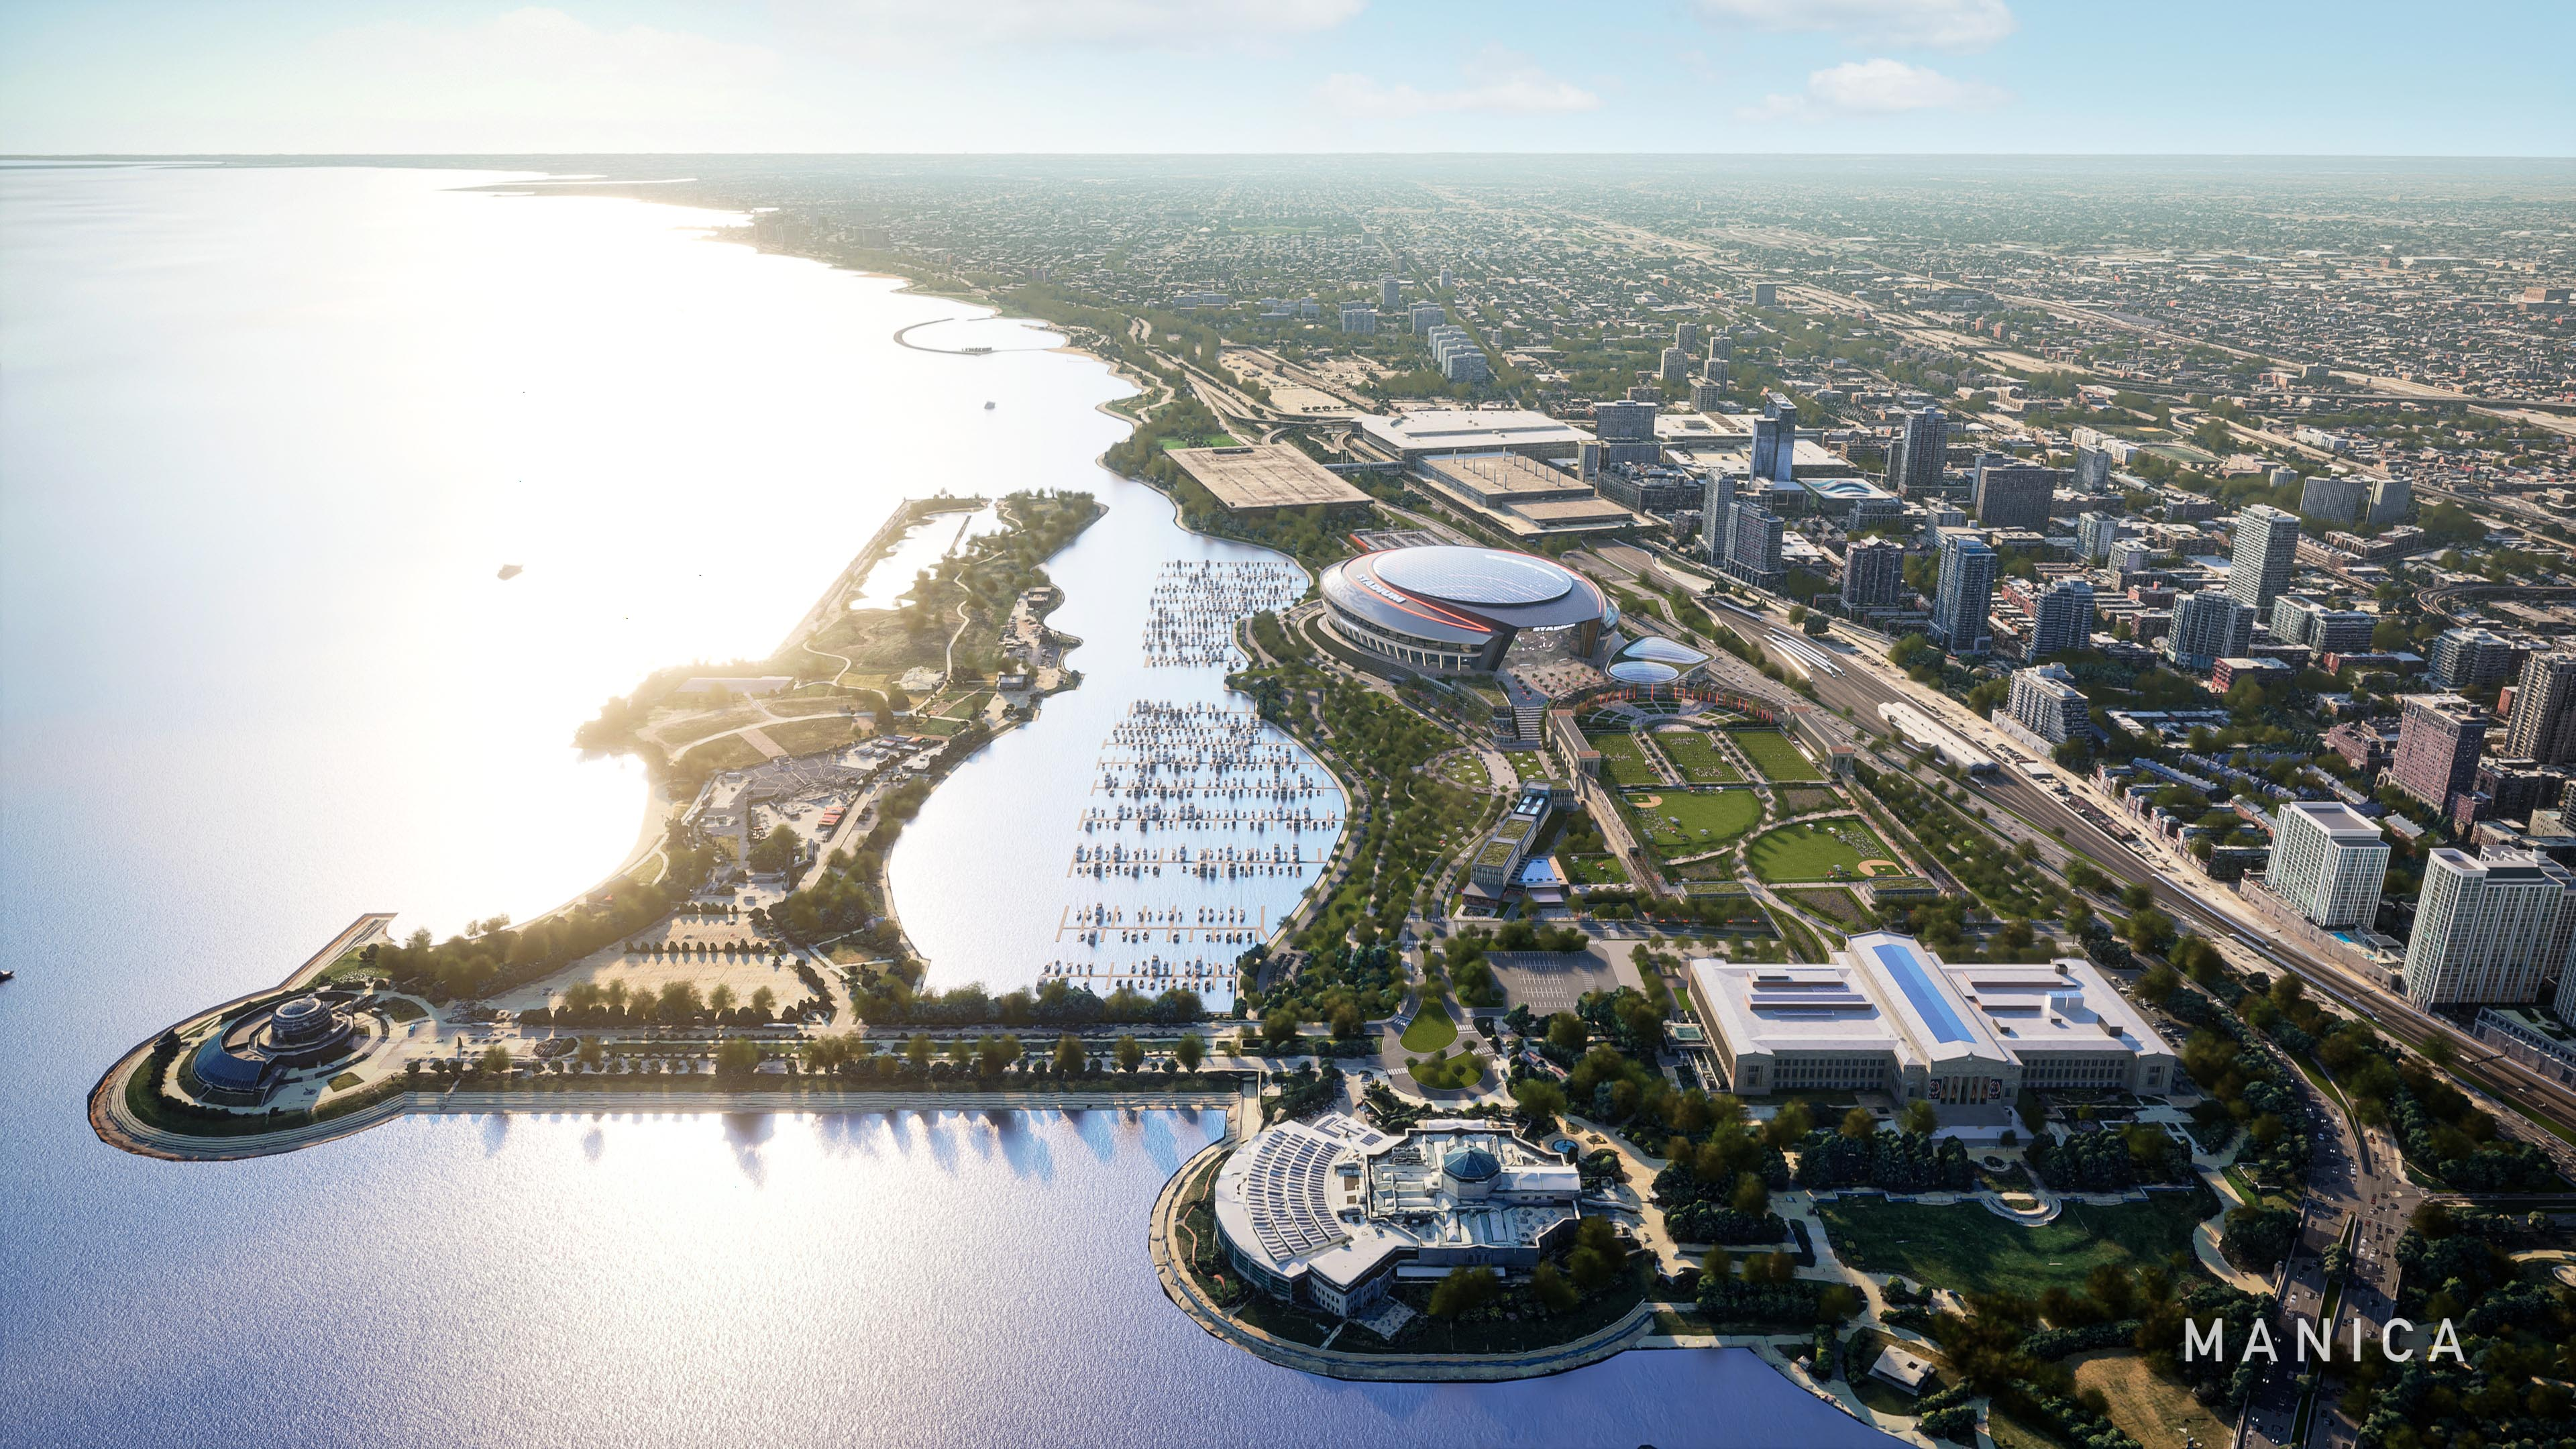 Local economist calls Bears stadium a terrible investment for lakefront site